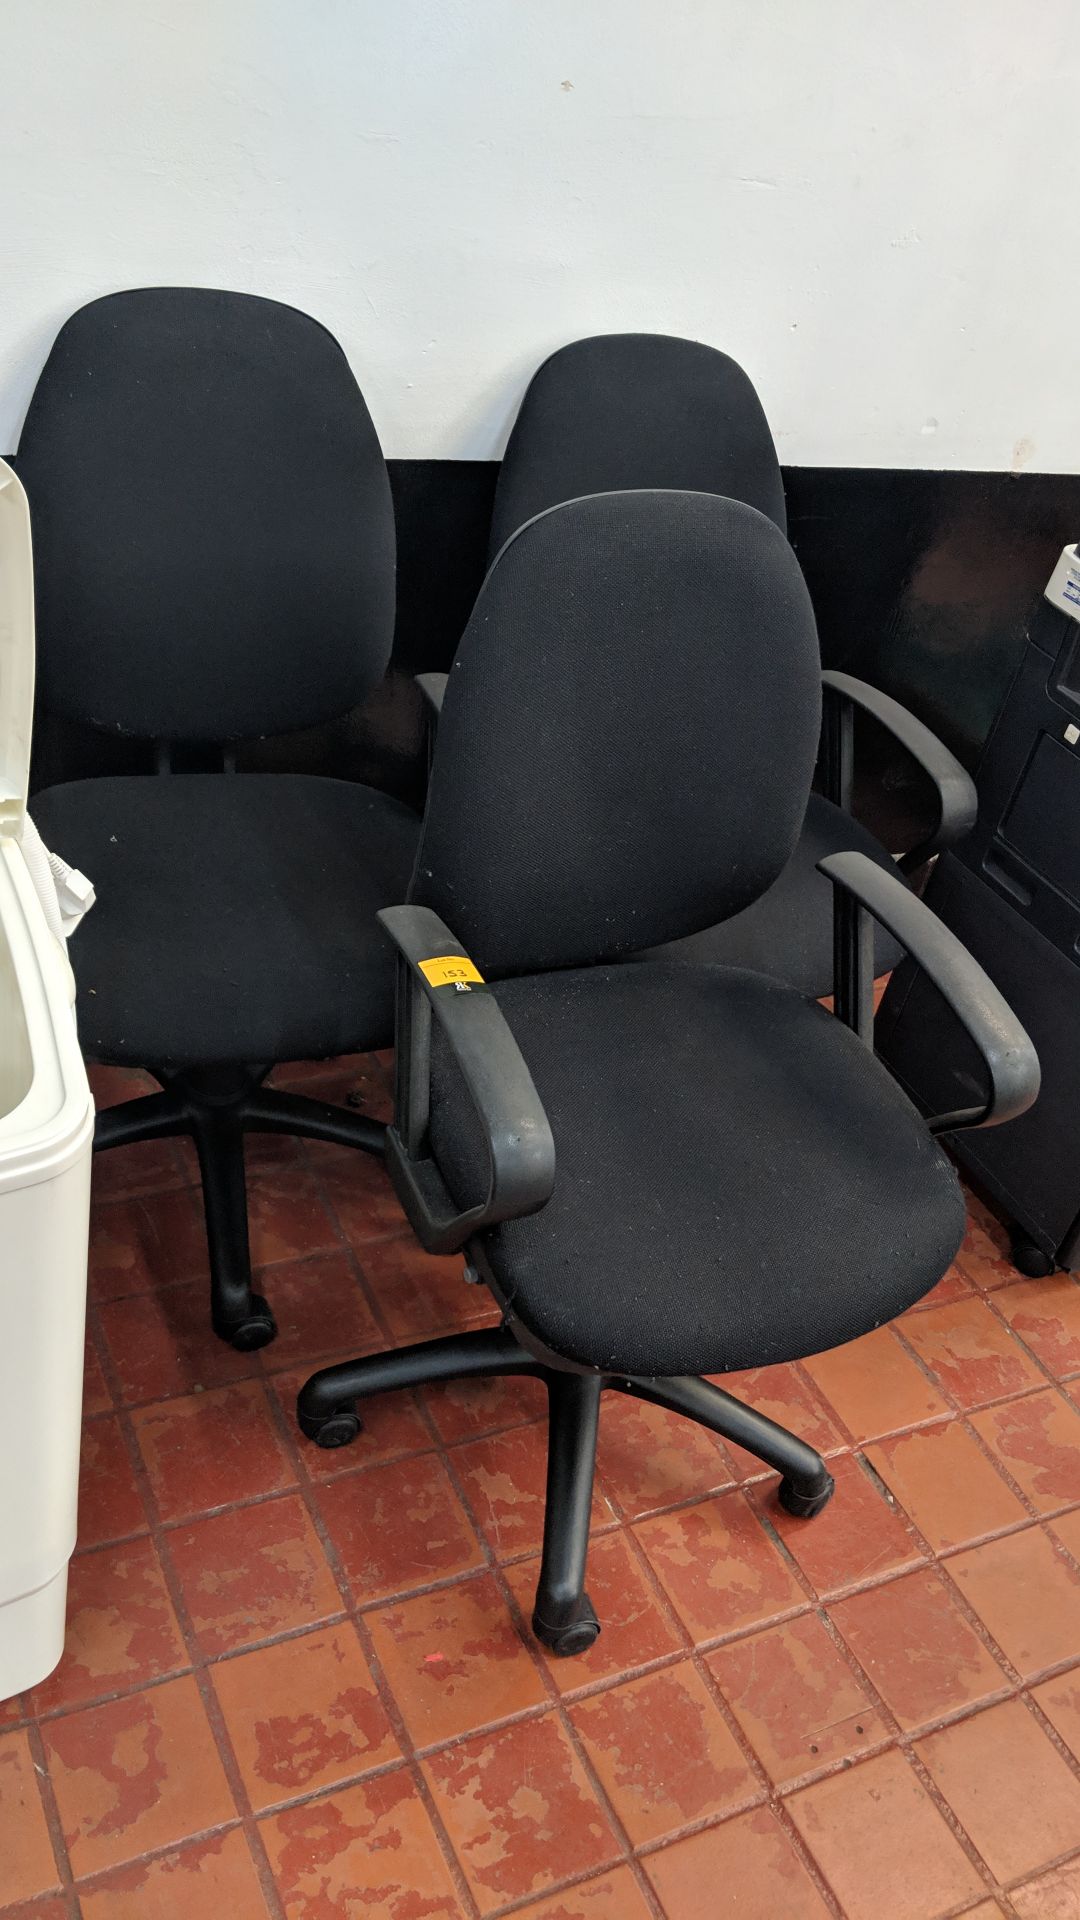 3 off operator's chairs in black fabric, with arms IMPORTANT: Please remember goods successfully bid